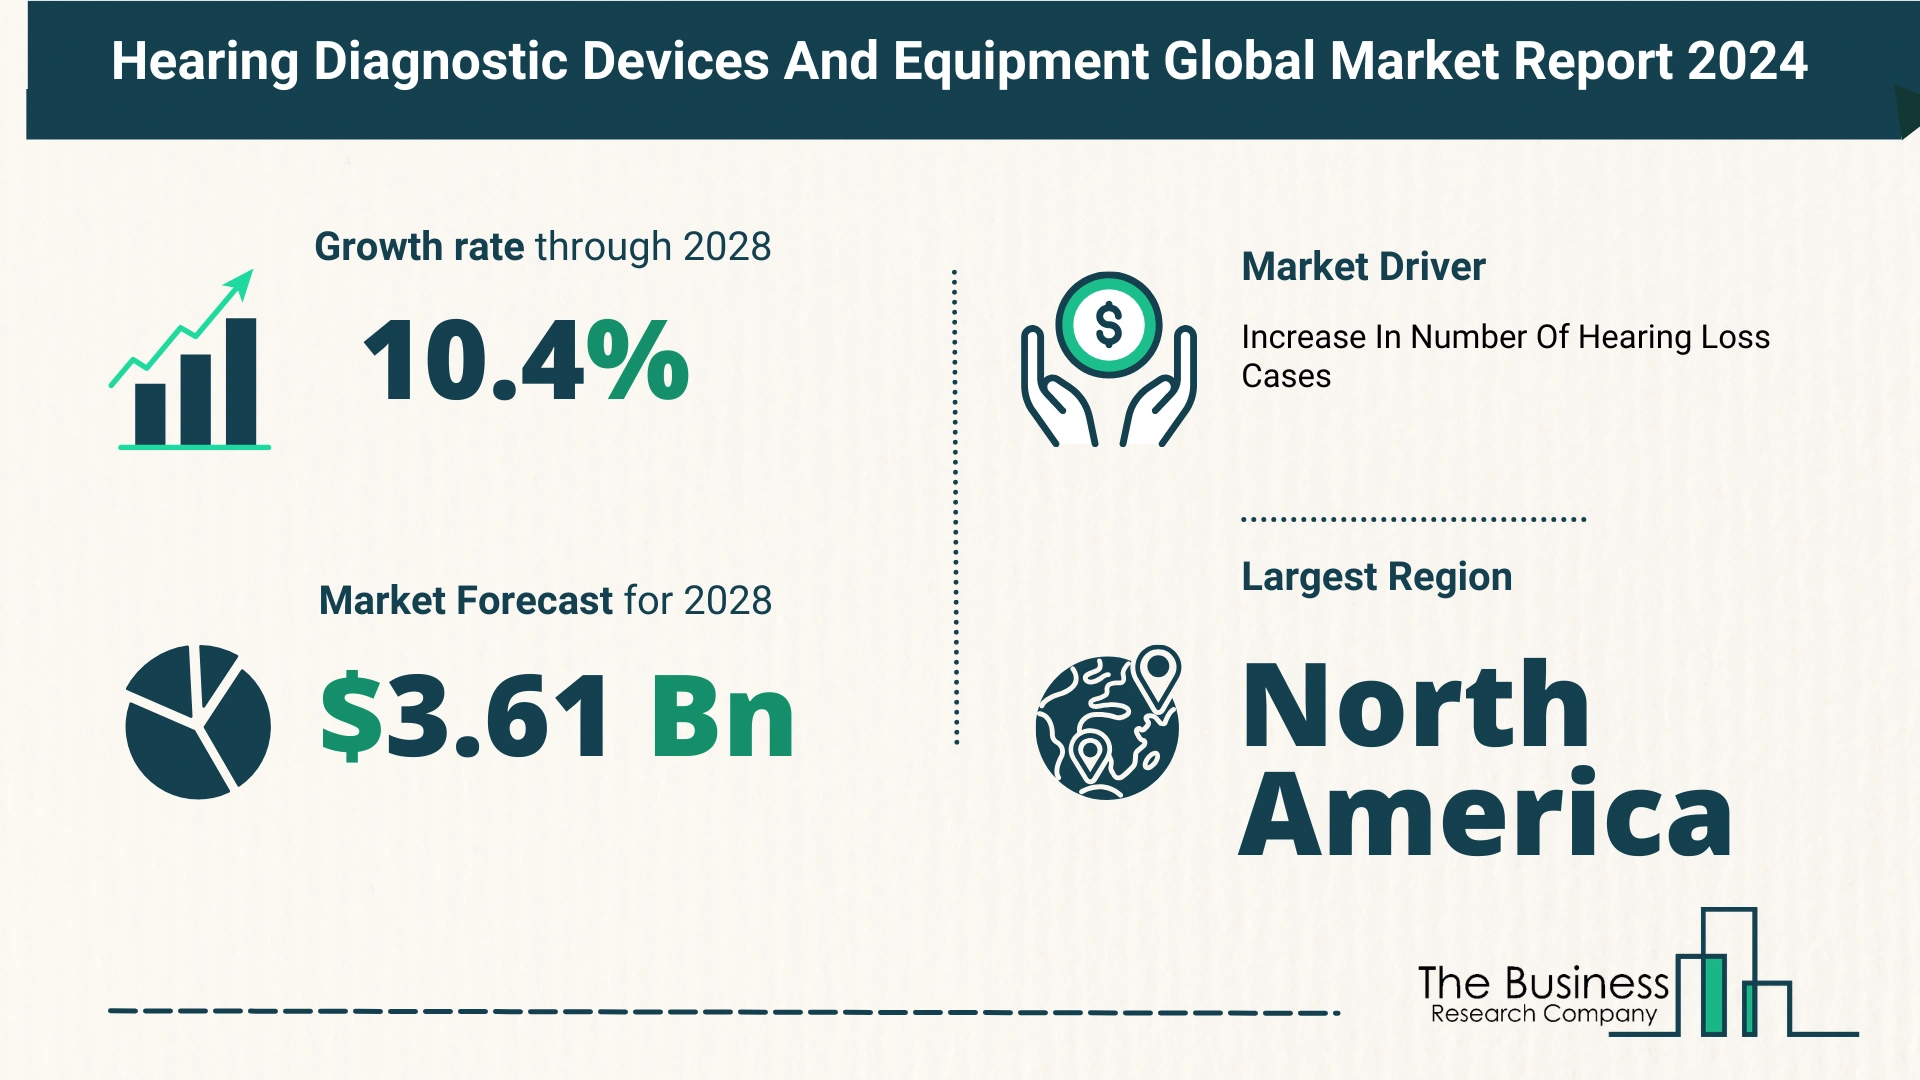 Global Hearing Diagnostic Devices And Equipment Market Size